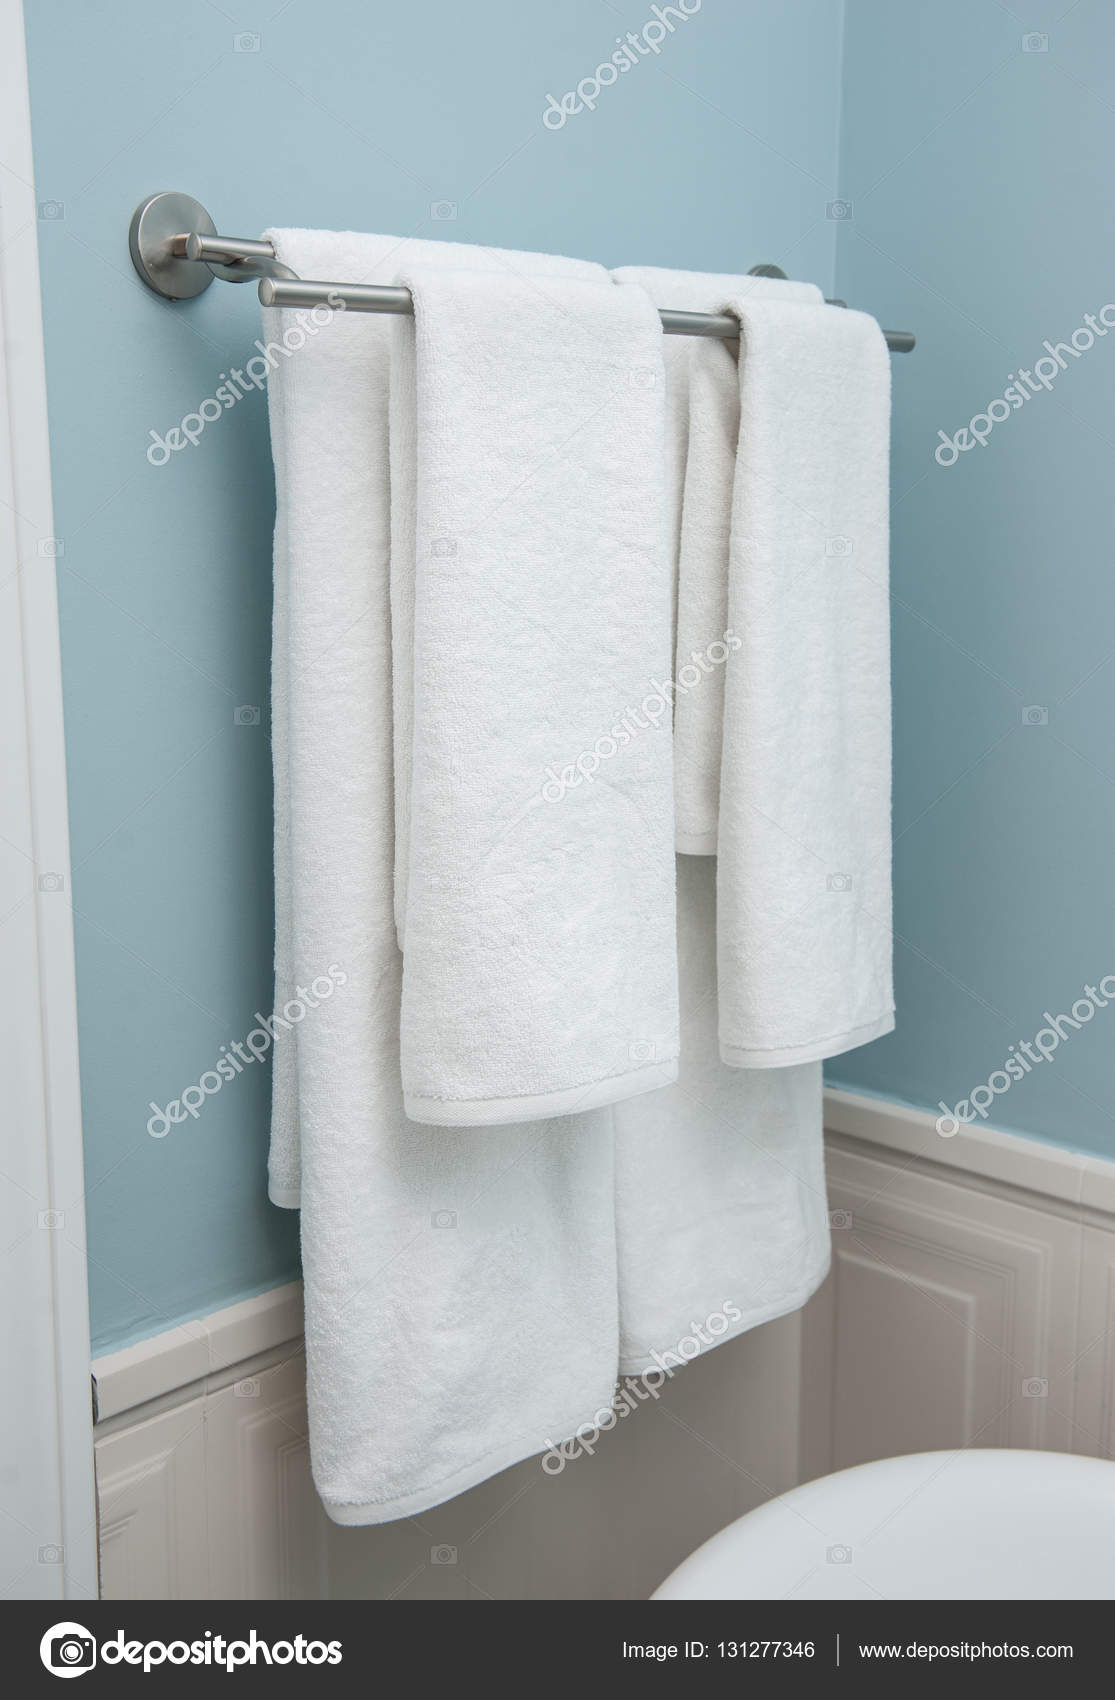 Two towels hanging on the Clothes line.Clean white towels on a